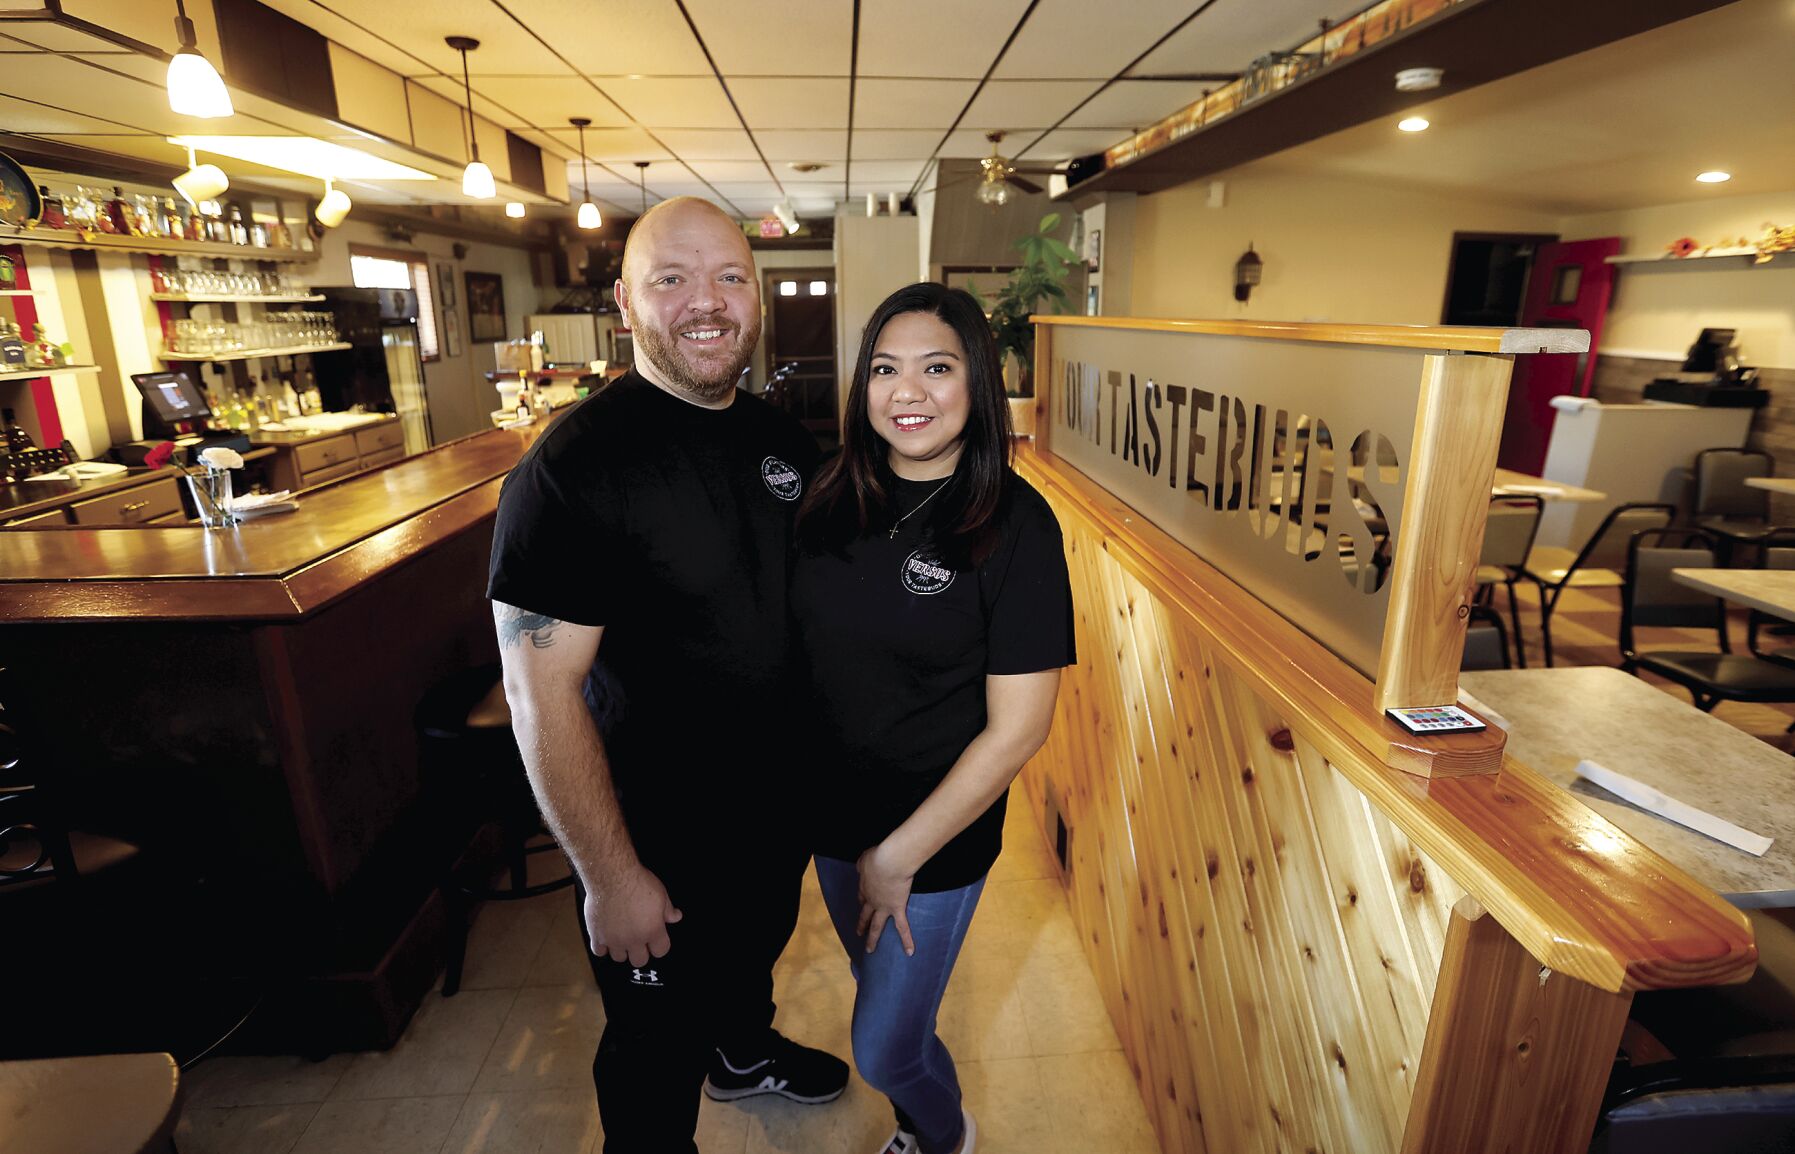 Owners Lucas and Liberty Miller stand at Versus 2.0 Authentic Asian Kitchen/Bar in Dubuque.    PHOTO CREDIT: JESSICA REILLY